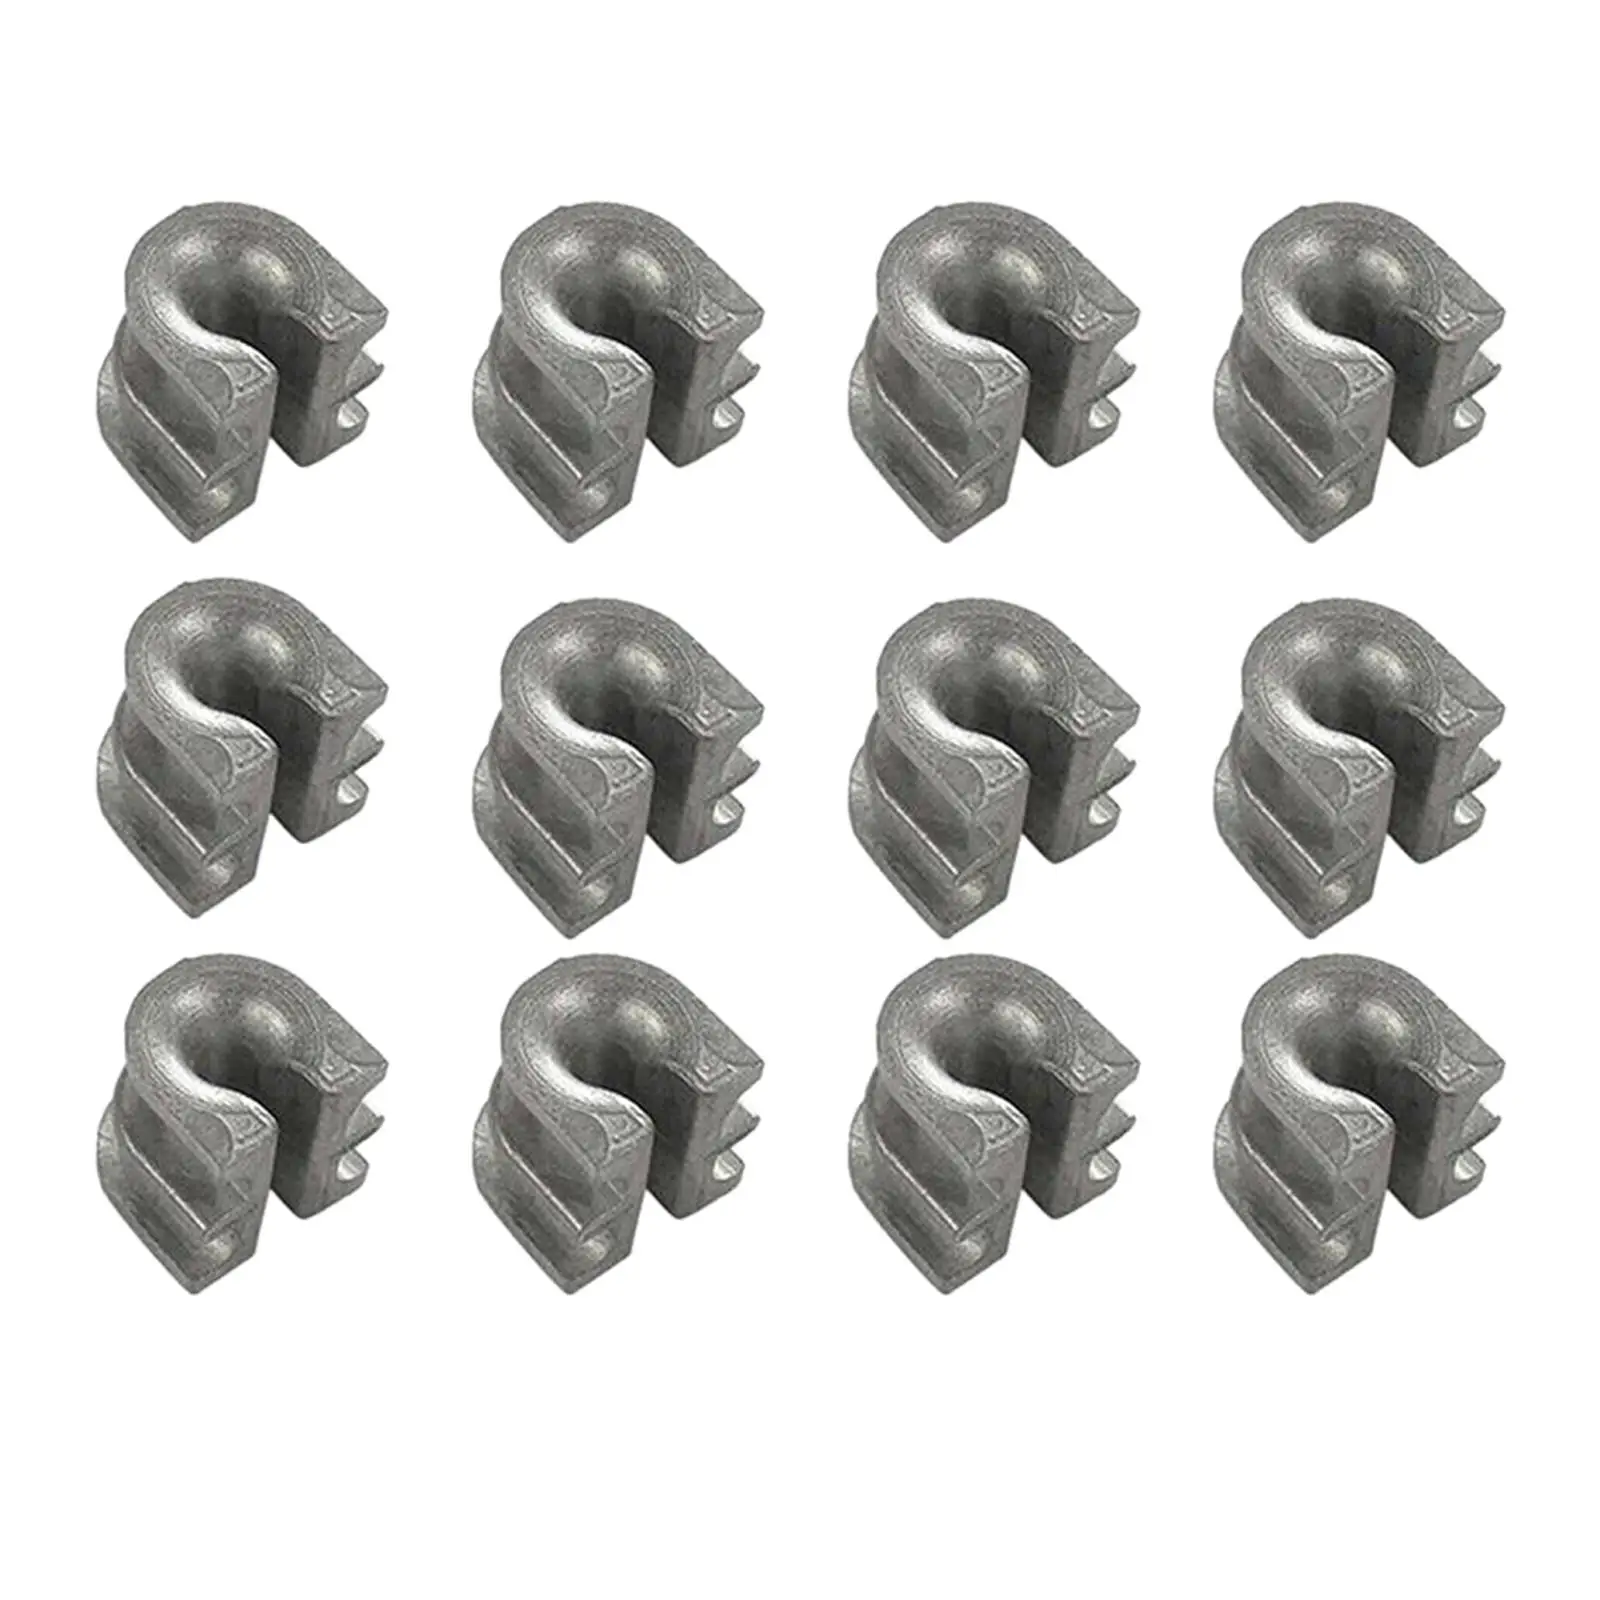 

12x Grass Trimmer Head Eyelet Sleeve Eyelet Line Retainer for Stihl FS90 FS55 Grass Cutting Head Replacement